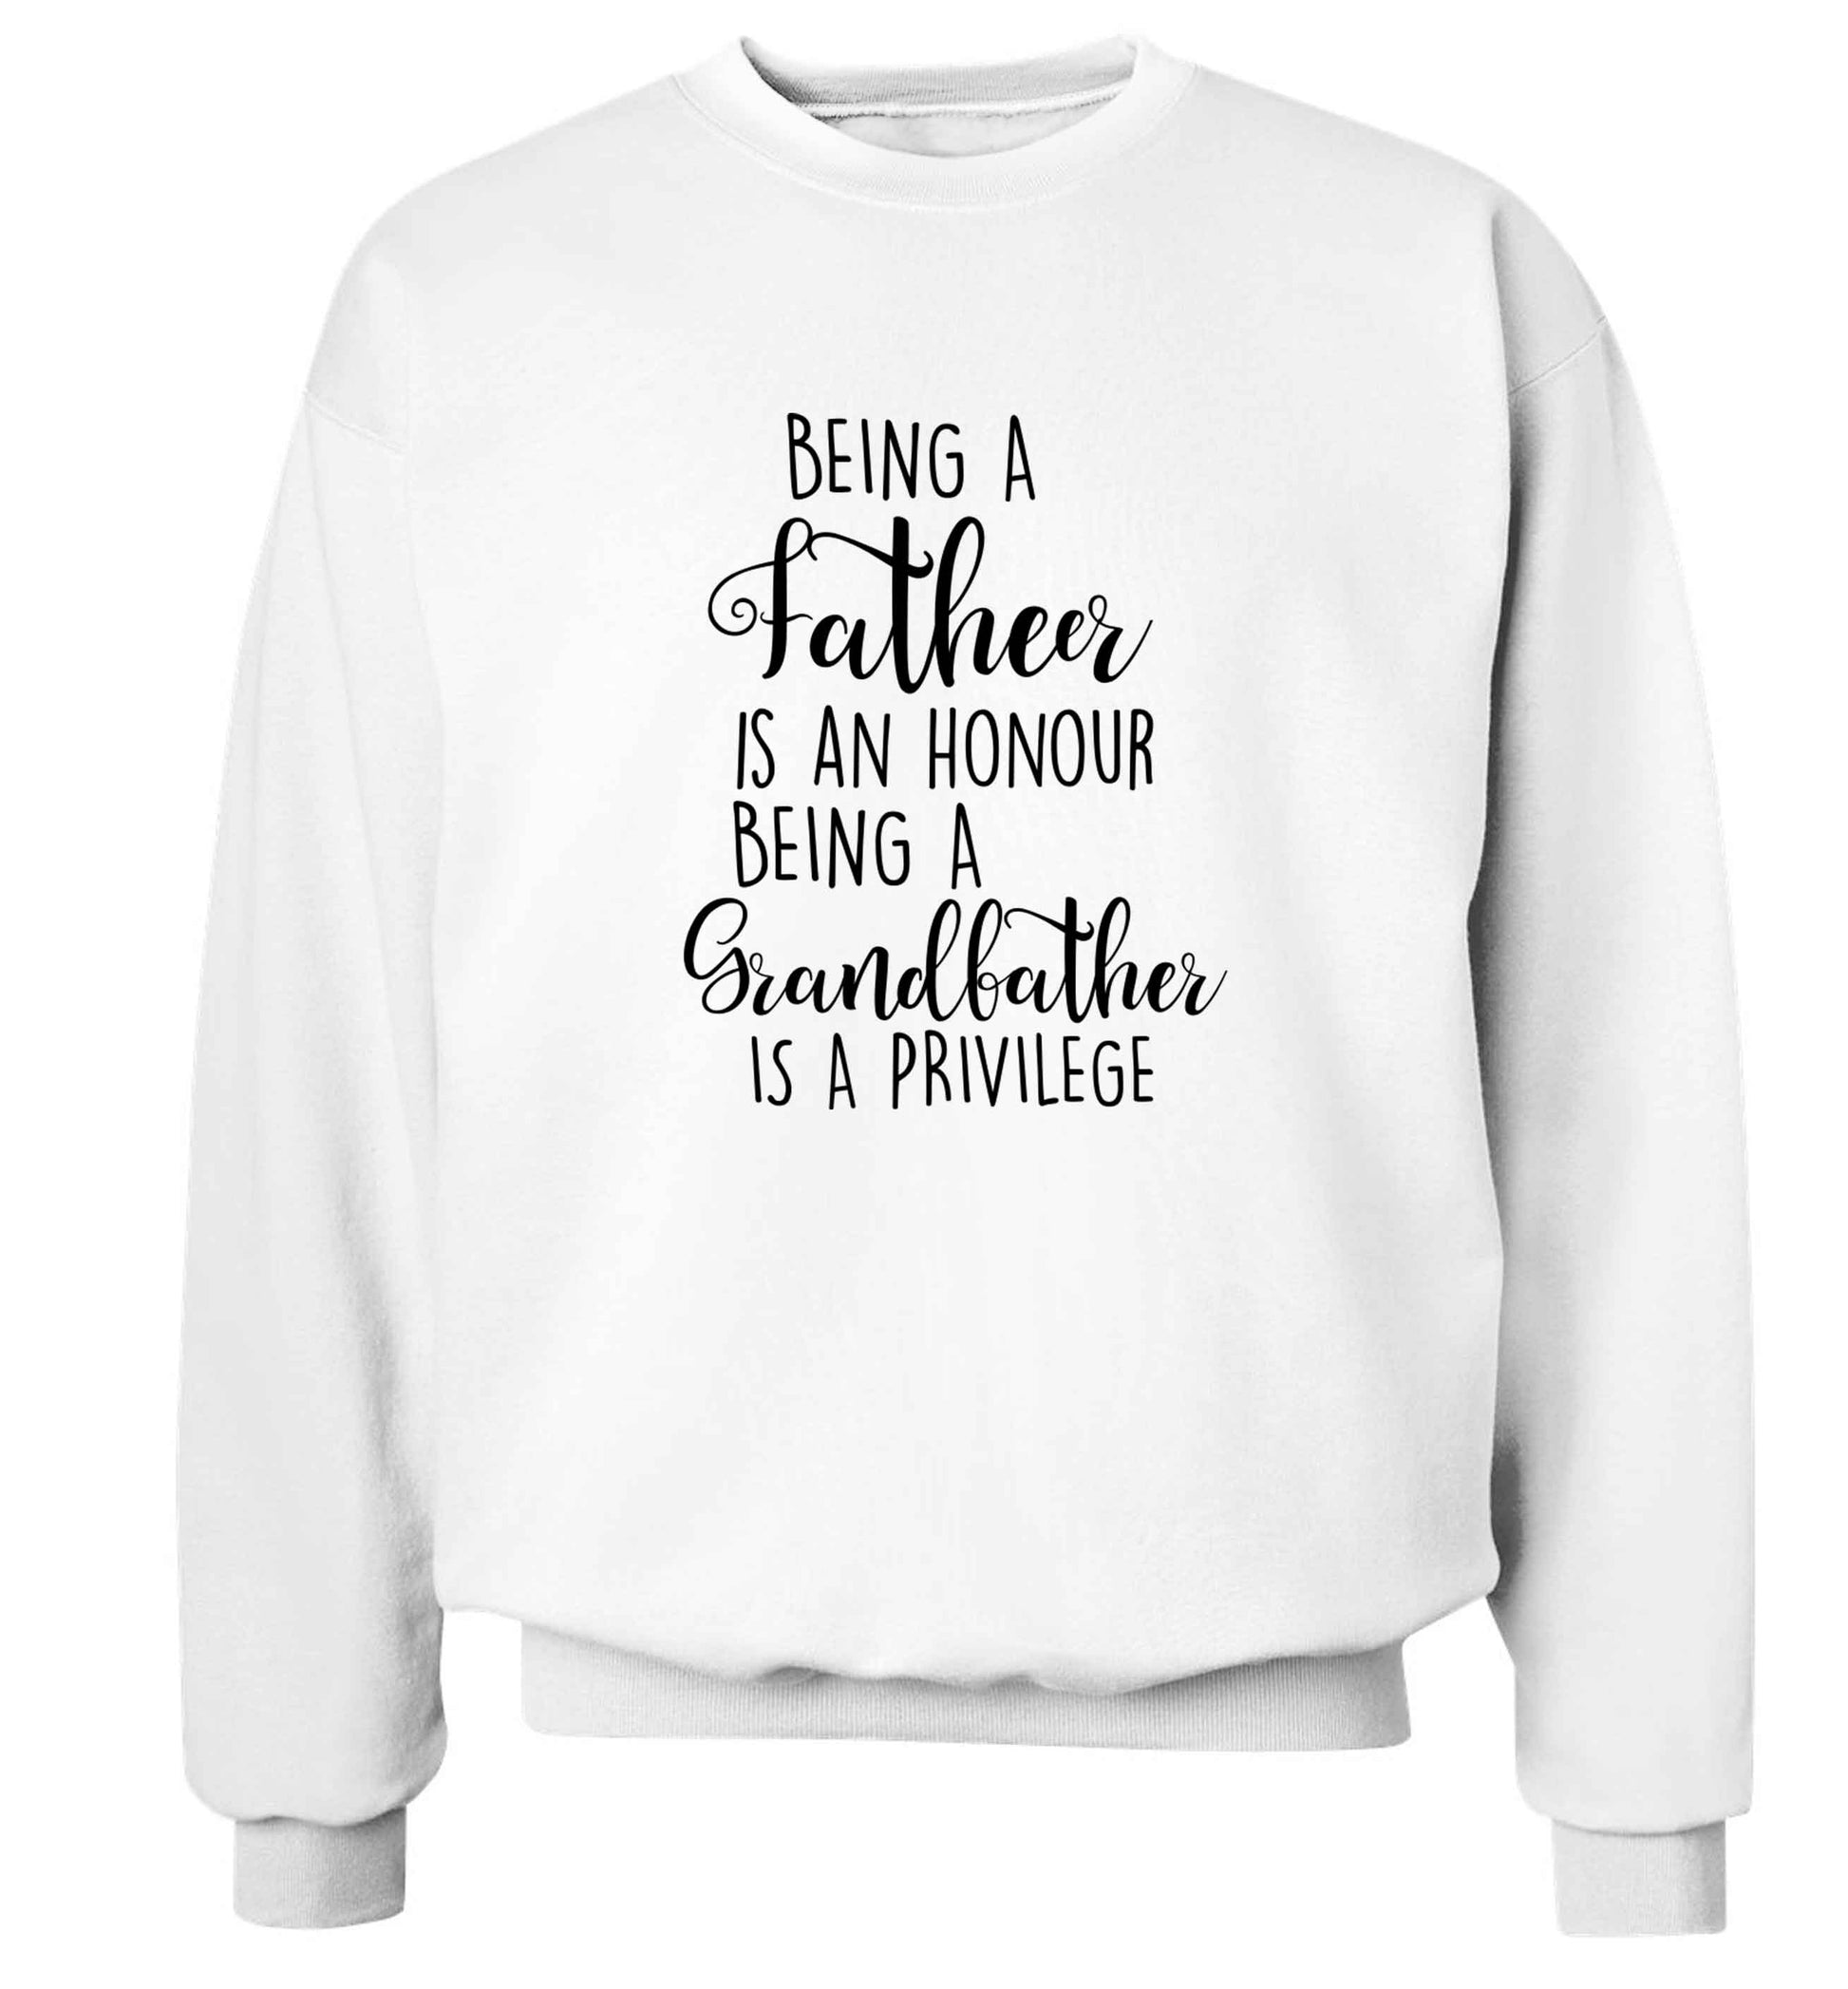 Being a father is an honour being a grandfather is a privilege Adult's unisex white Sweater 2XL